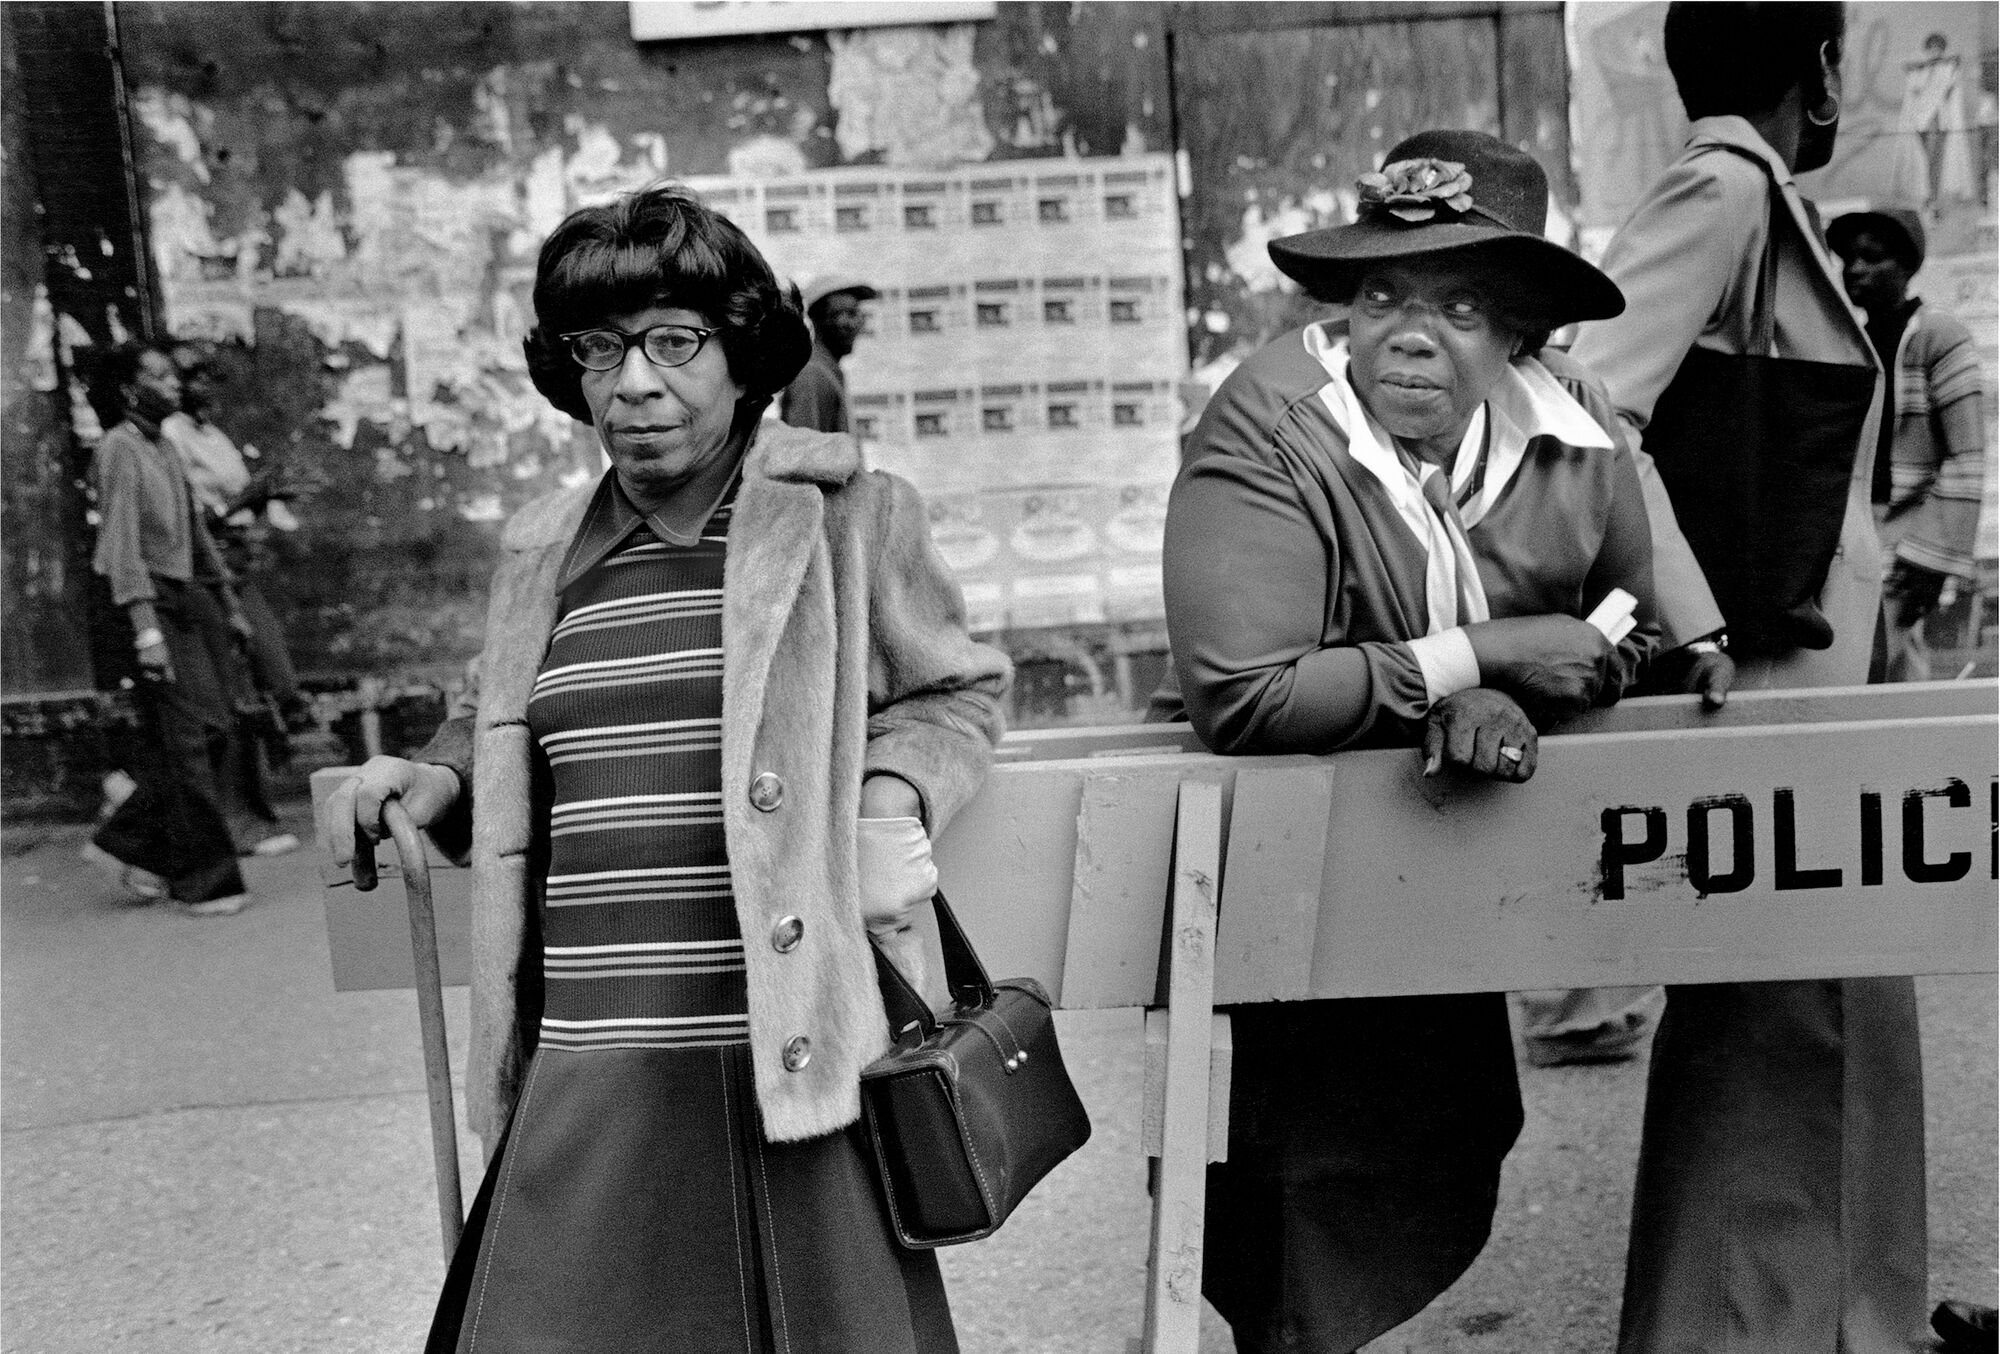 “Two Women at a Parade,” 1978, printed 1979, Dawoud Bey (American, born 1953), Gelatin silver print